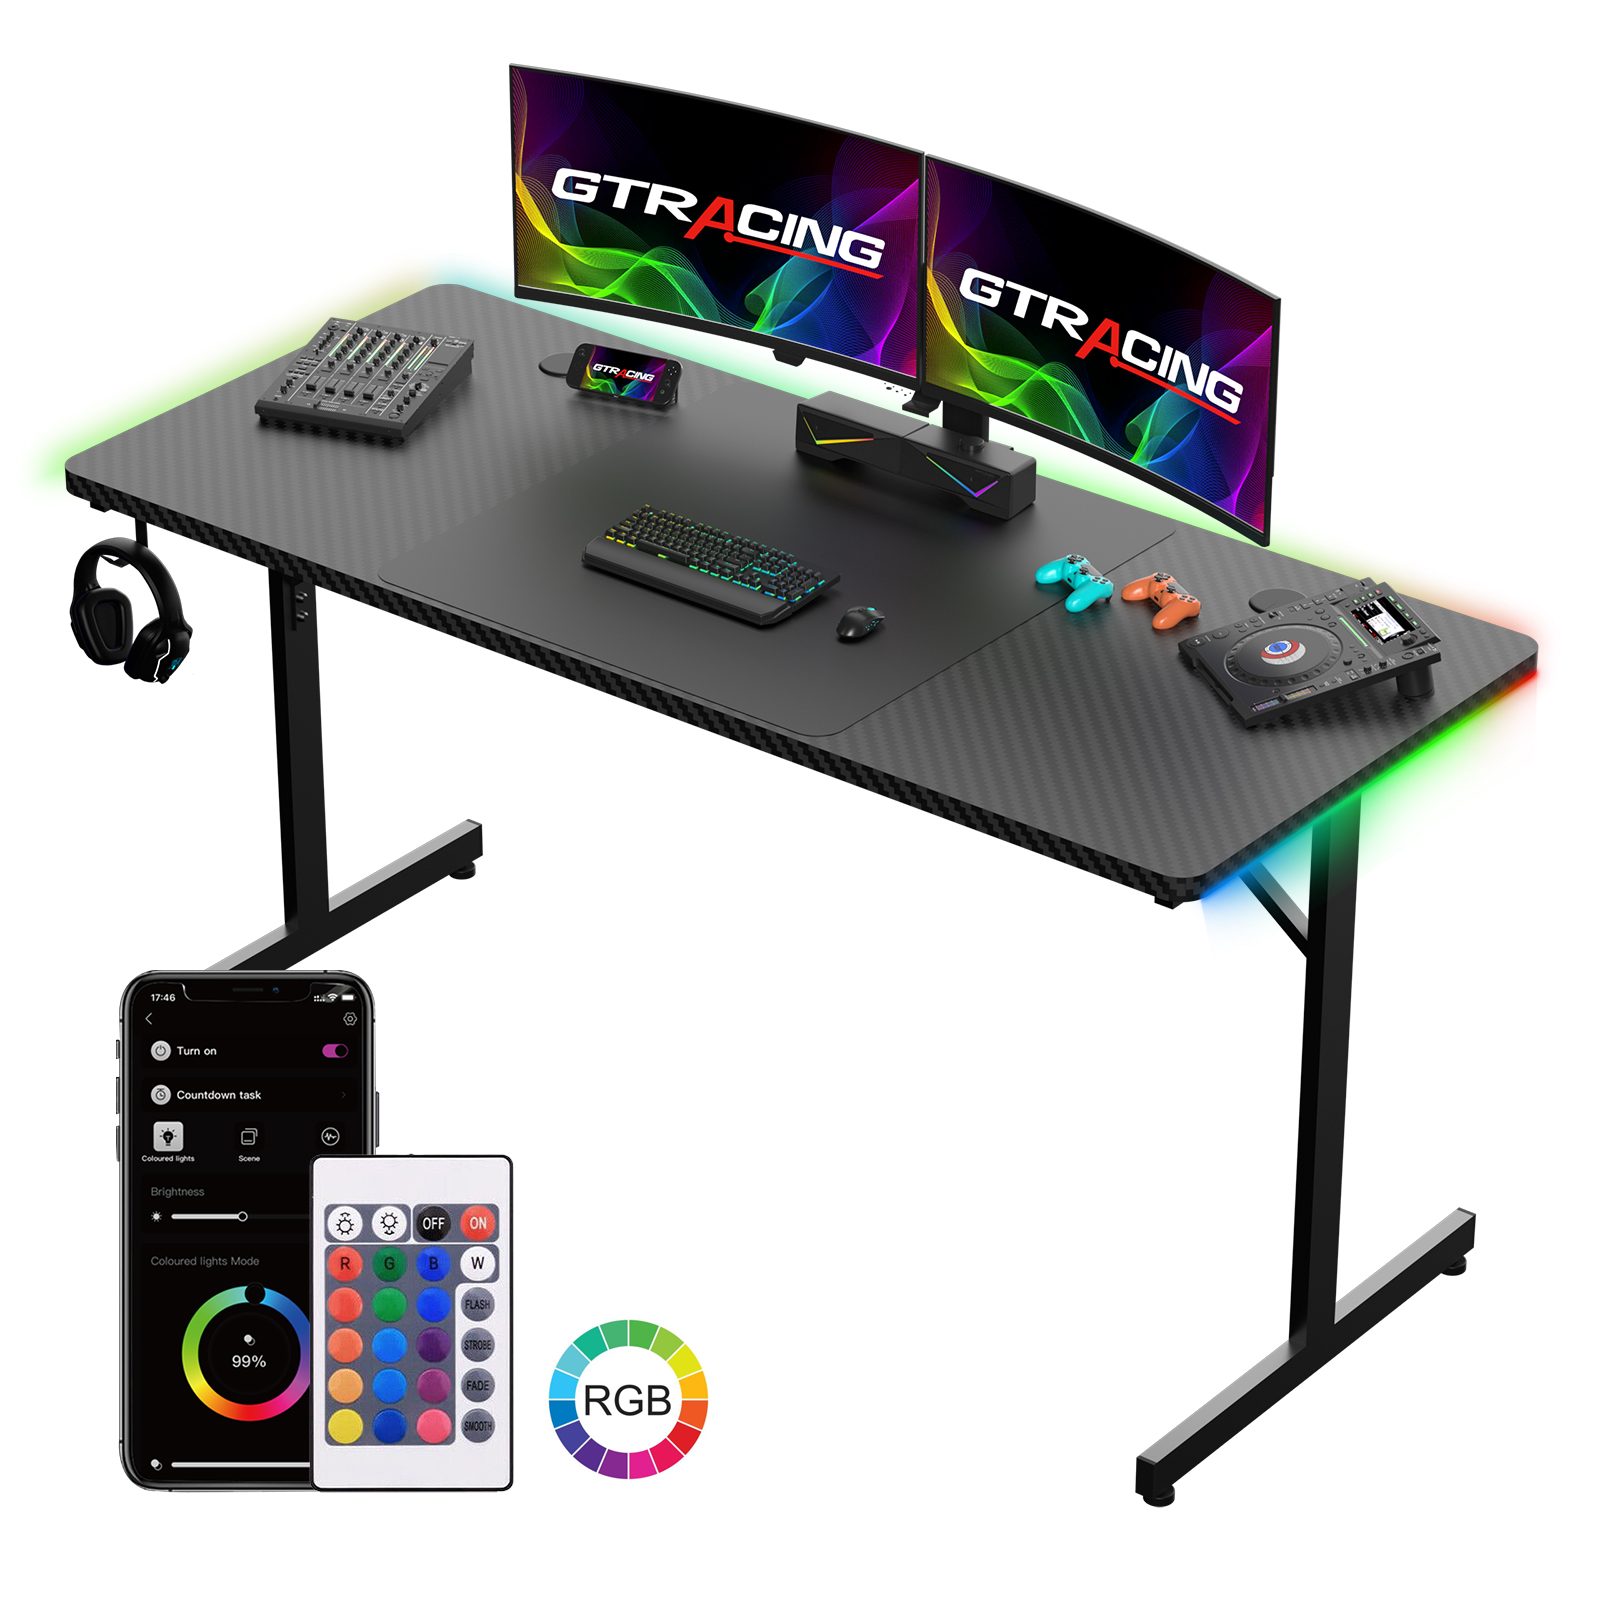 GTRACING 55" Large RGB Gaming Desk with Mouse Pad T-Shaped Office Desk Spacious Work Surface Table, Black - image 1 of 10